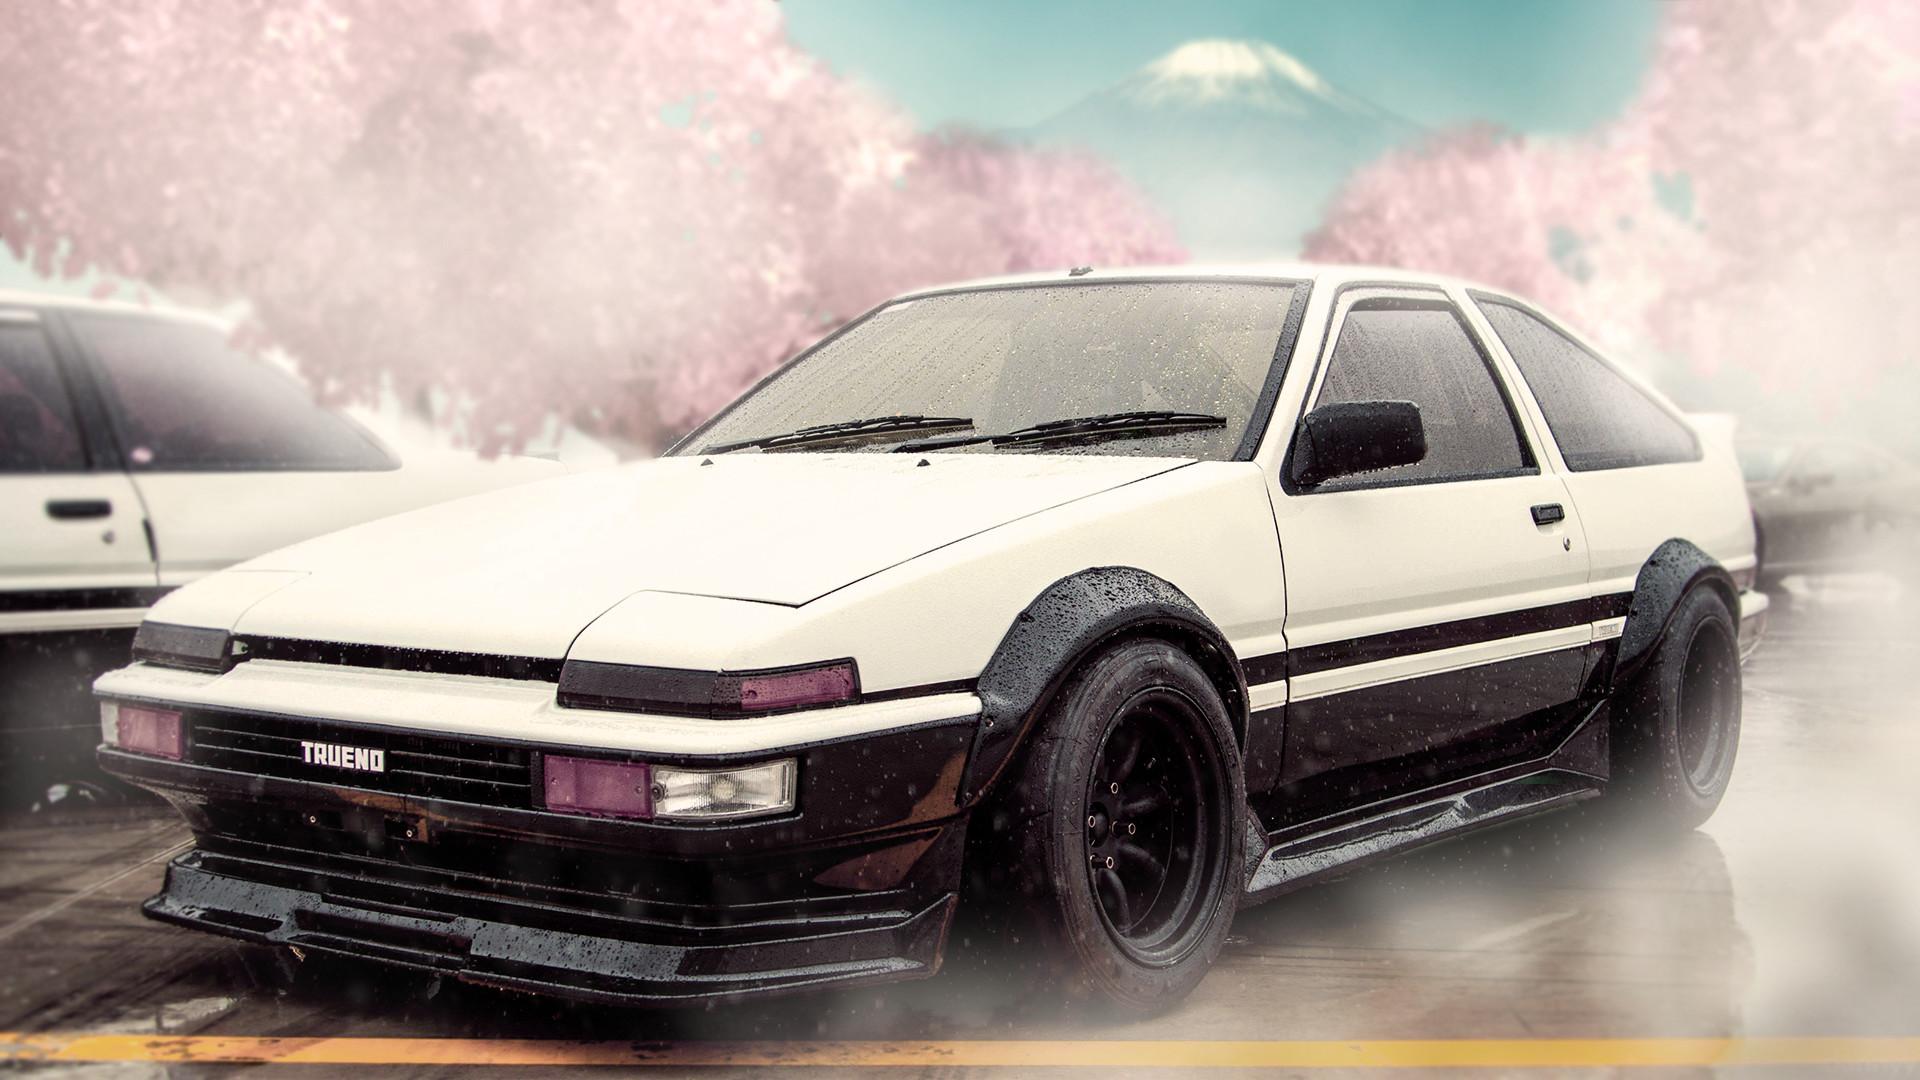 Ae 86 Anime Hd Wallpapers Wallpaper Cave